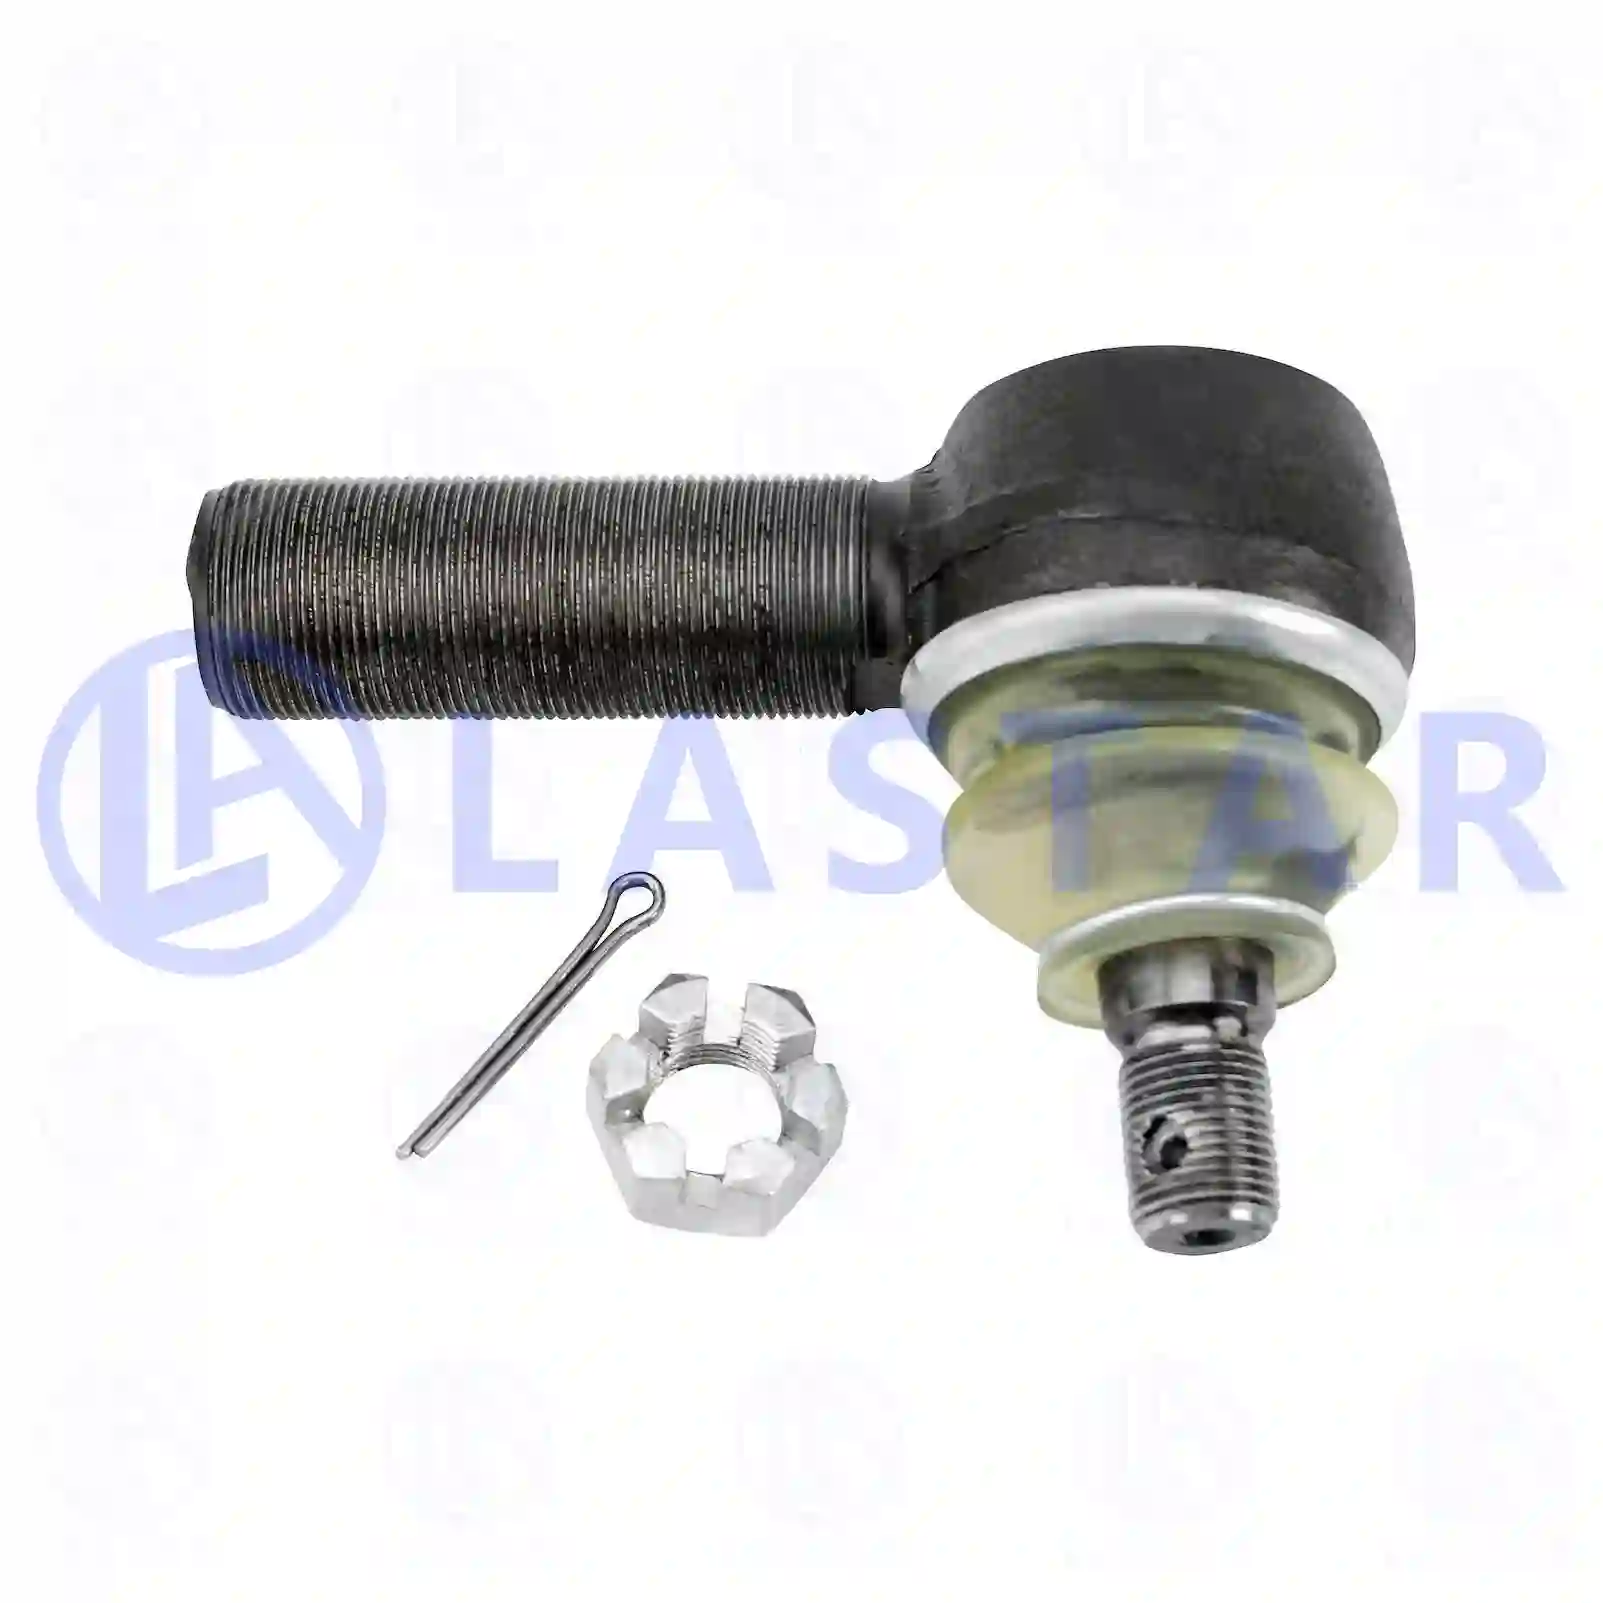 Ball joint, right hand thread, 77705106, 0003303135, 0003308135, 0013300335, 0013300435, 0024601048, ZG40389-0008 ||  77705106 Lastar Spare Part | Truck Spare Parts, Auotomotive Spare Parts Ball joint, right hand thread, 77705106, 0003303135, 0003308135, 0013300335, 0013300435, 0024601048, ZG40389-0008 ||  77705106 Lastar Spare Part | Truck Spare Parts, Auotomotive Spare Parts